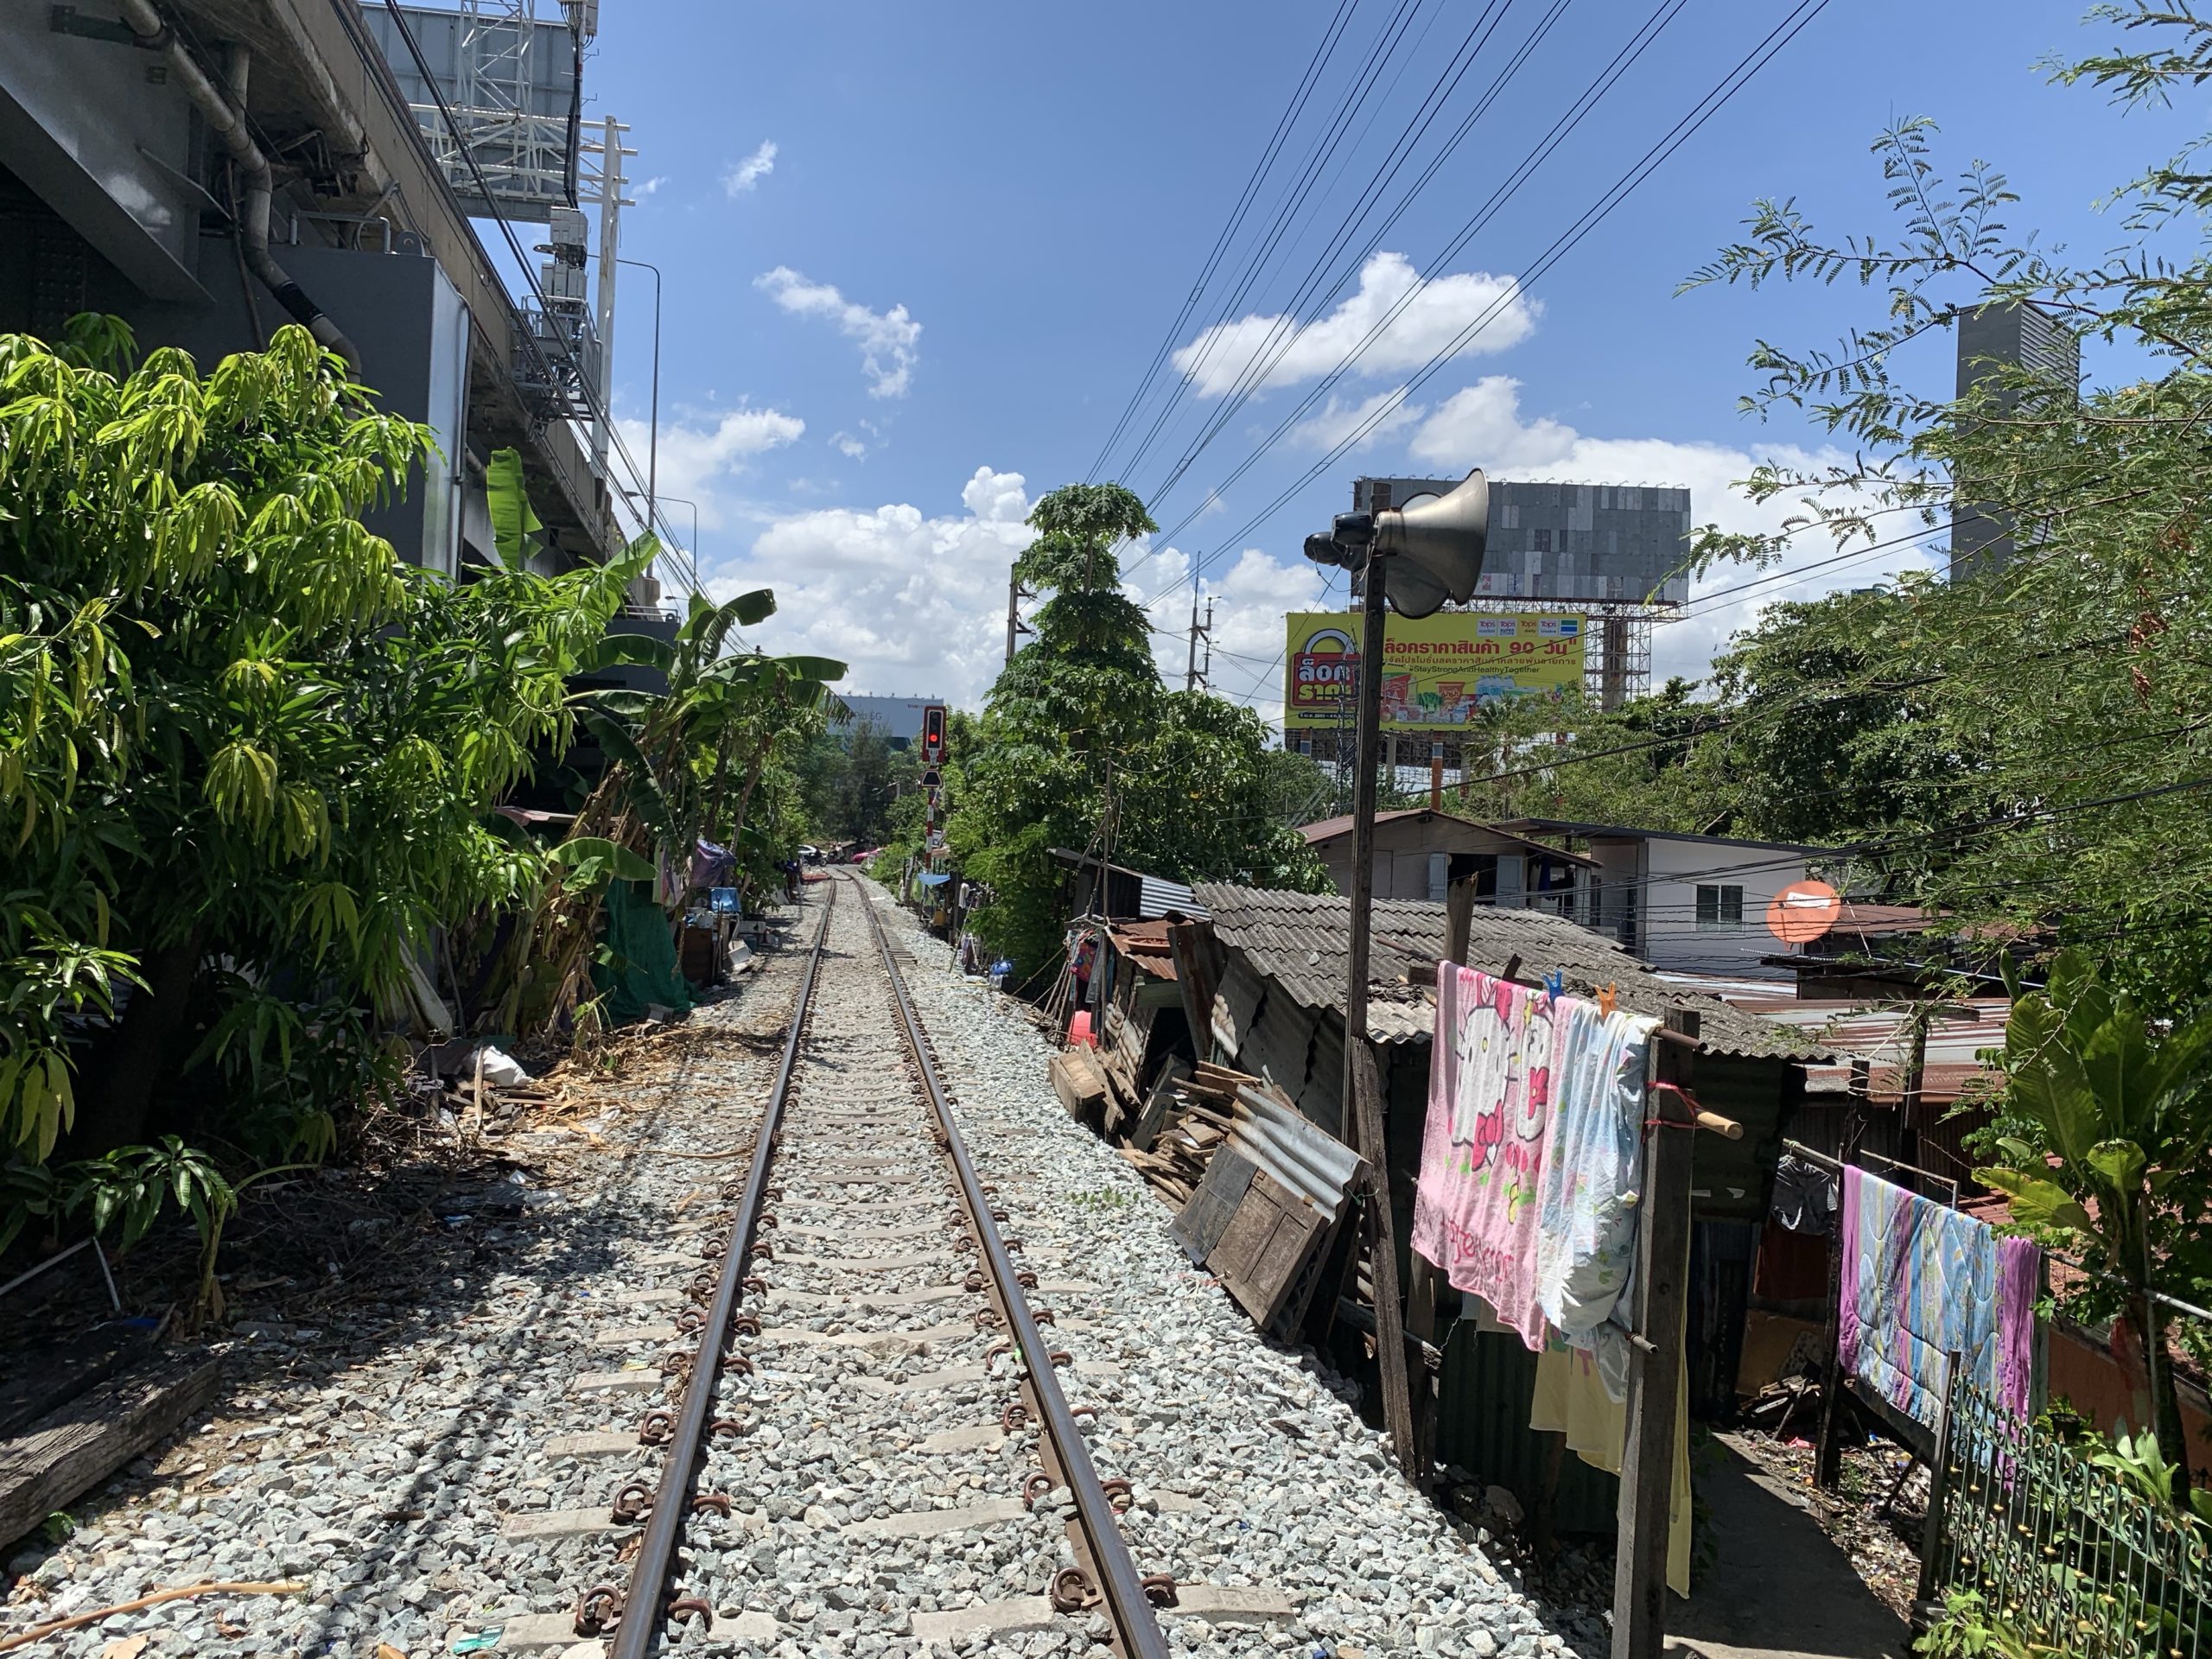 train tracks between buildings with clothes on the side